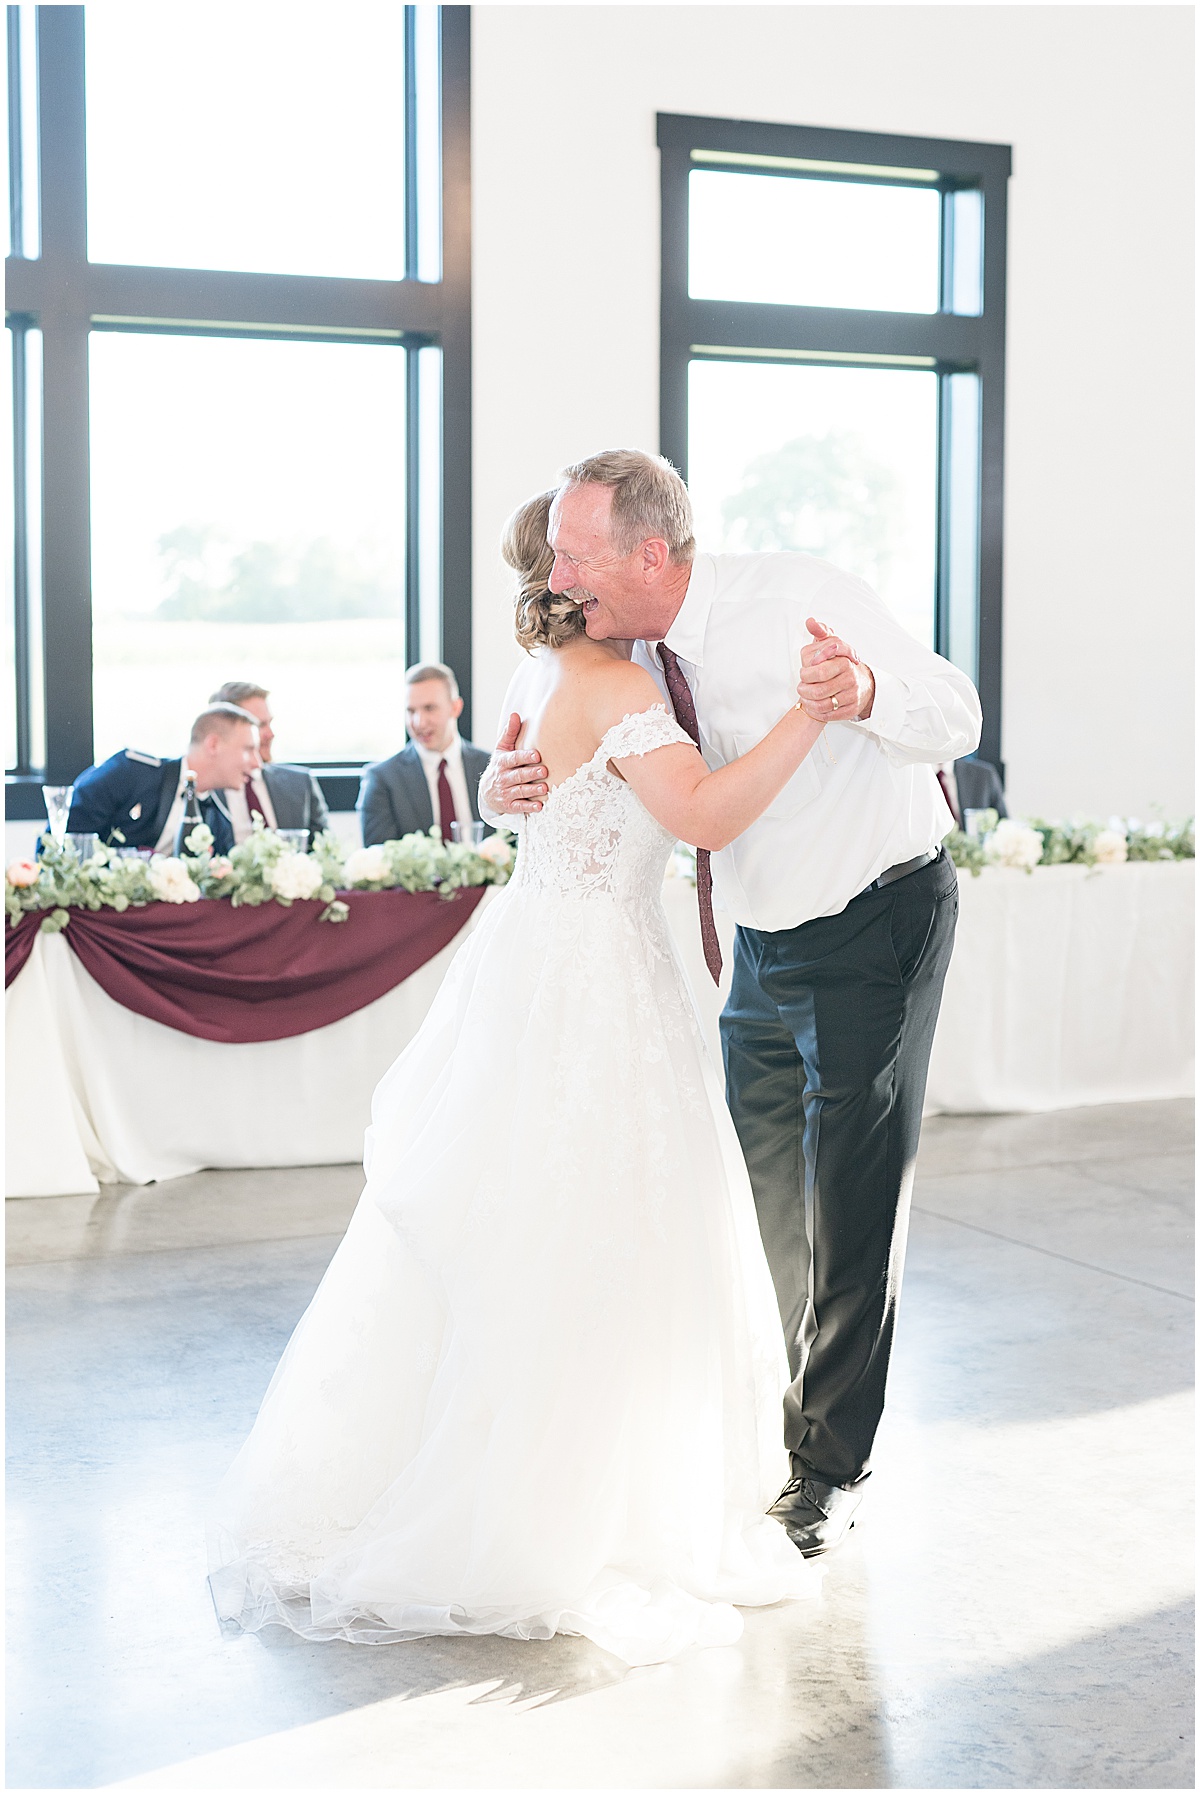 Dancing at wedding reception at New Journey Farms in Lafayette, Indiana